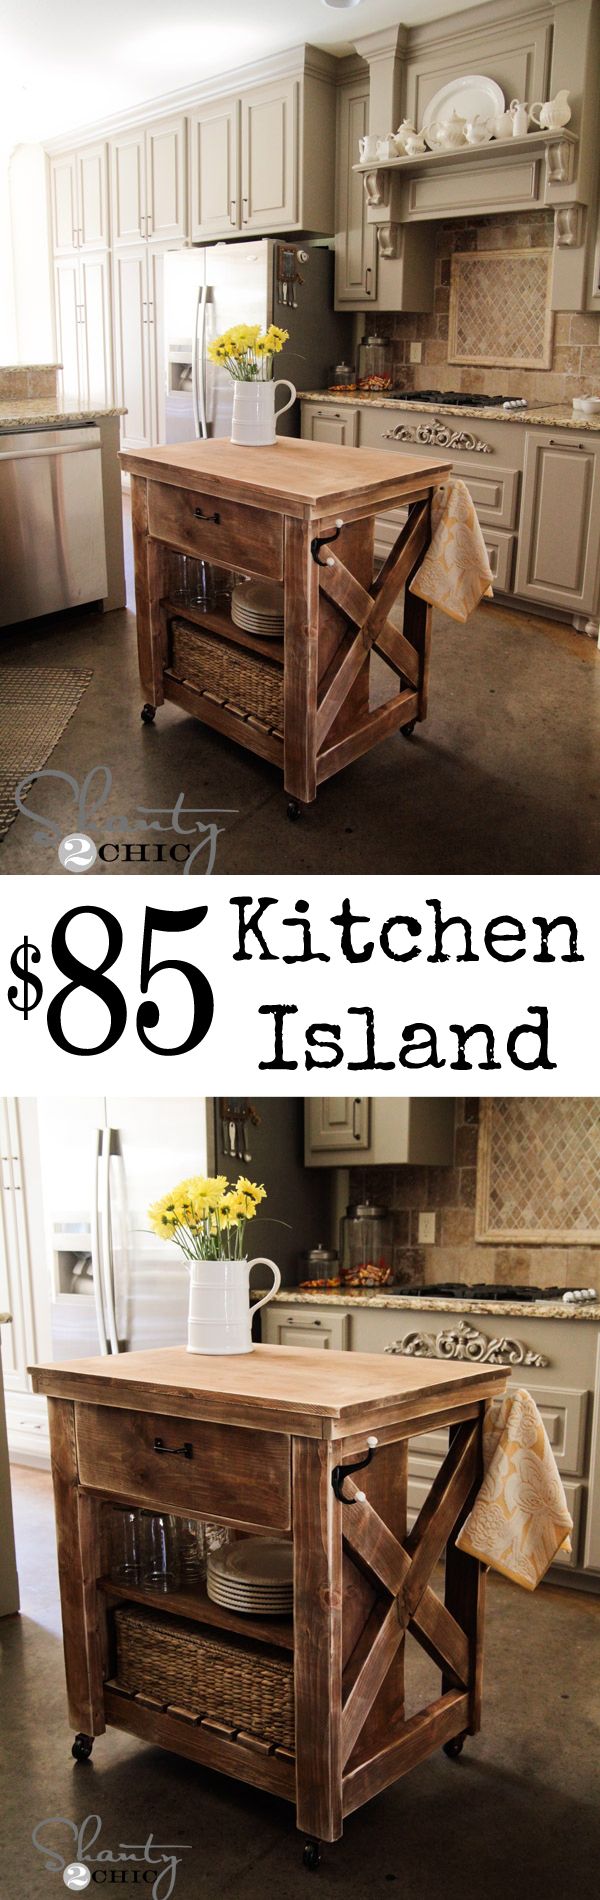 DIY Kitchen Island inspired by Pottery Barn! LOVE this and the price!! #diy